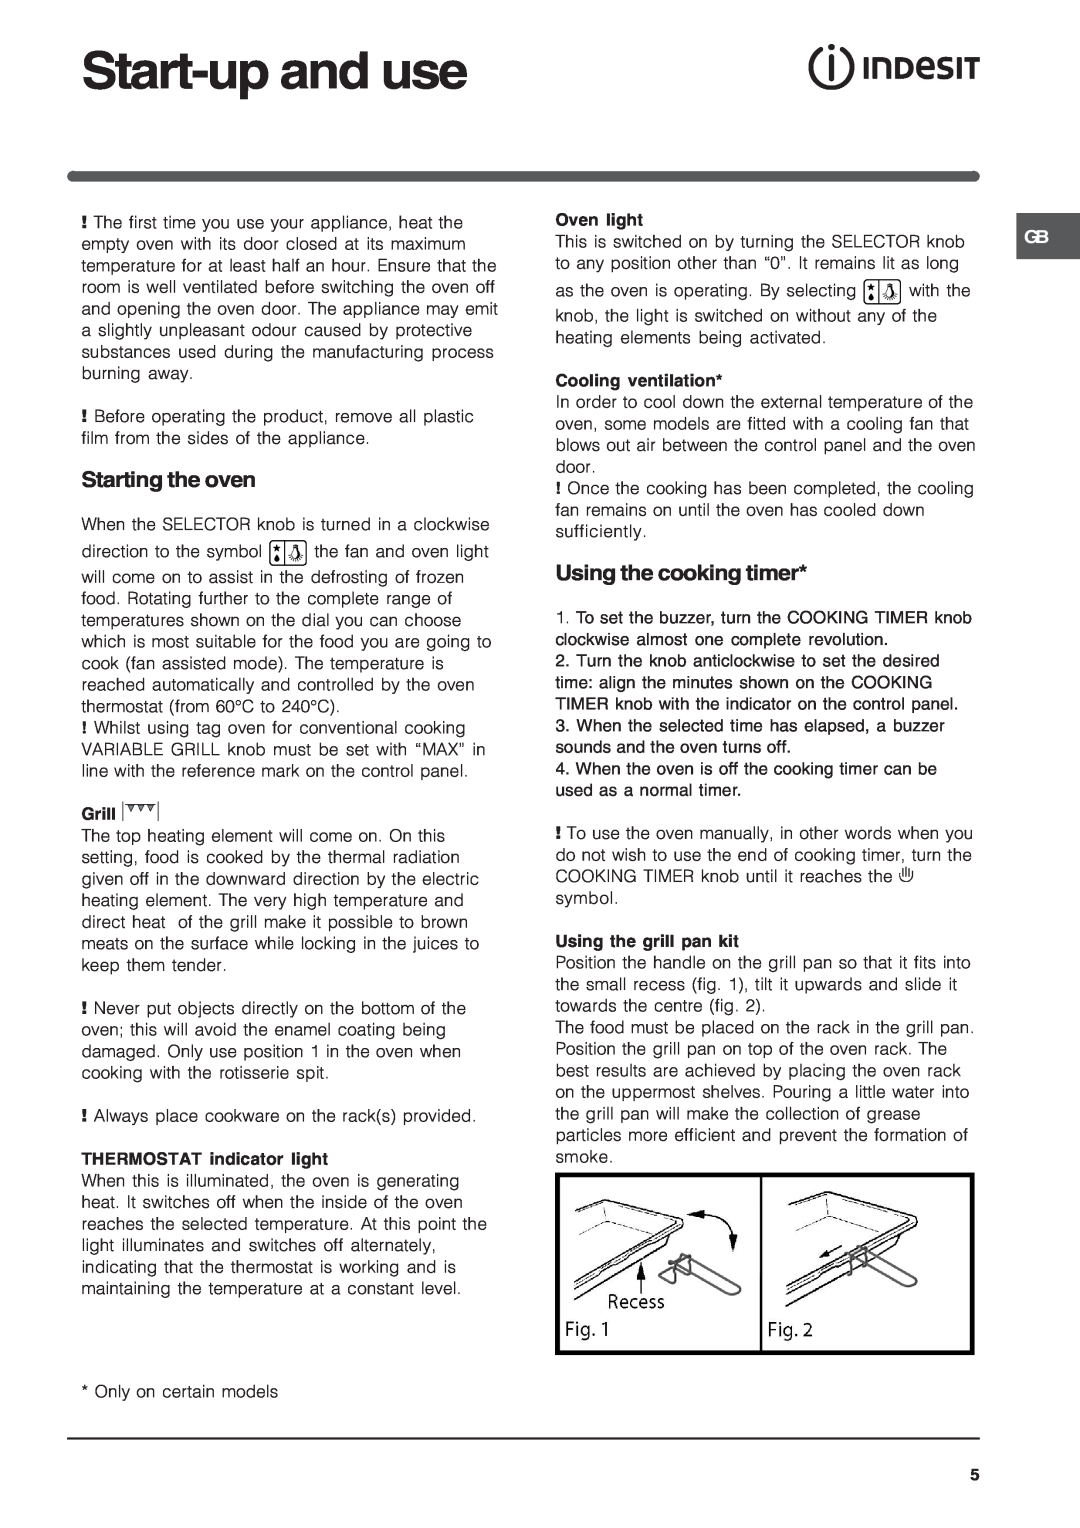 Indesit K6C32/G operating instructions Start-up and use, Starting the oven, Using the cooking timer 